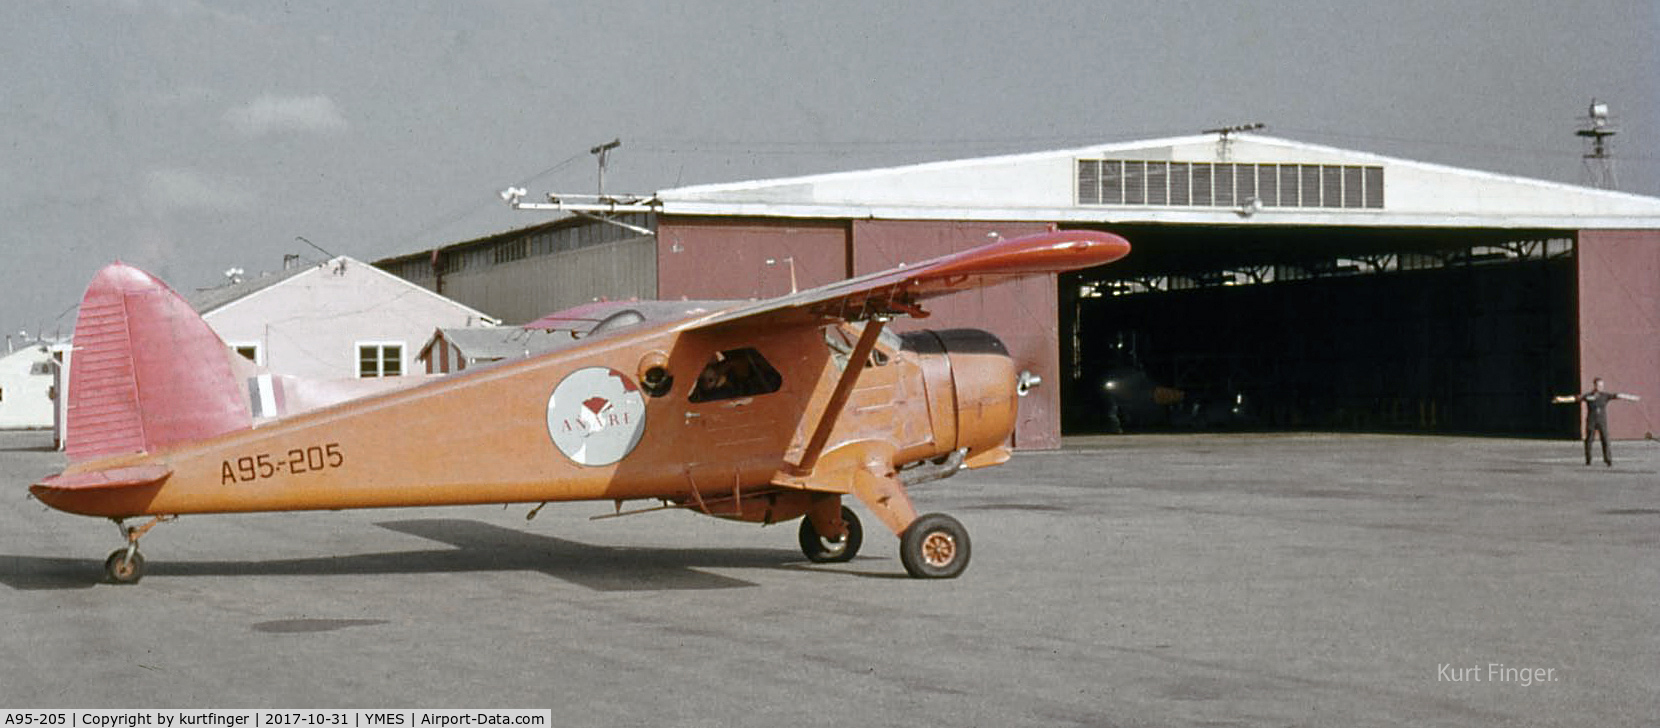 A95-205, 1960 De Havilland Canada DHC-2 Beaver Mk.1 C/N 1430, DHC Beaver  RAAF serial A95-205 visiting East Sale from Point Cook late 1962